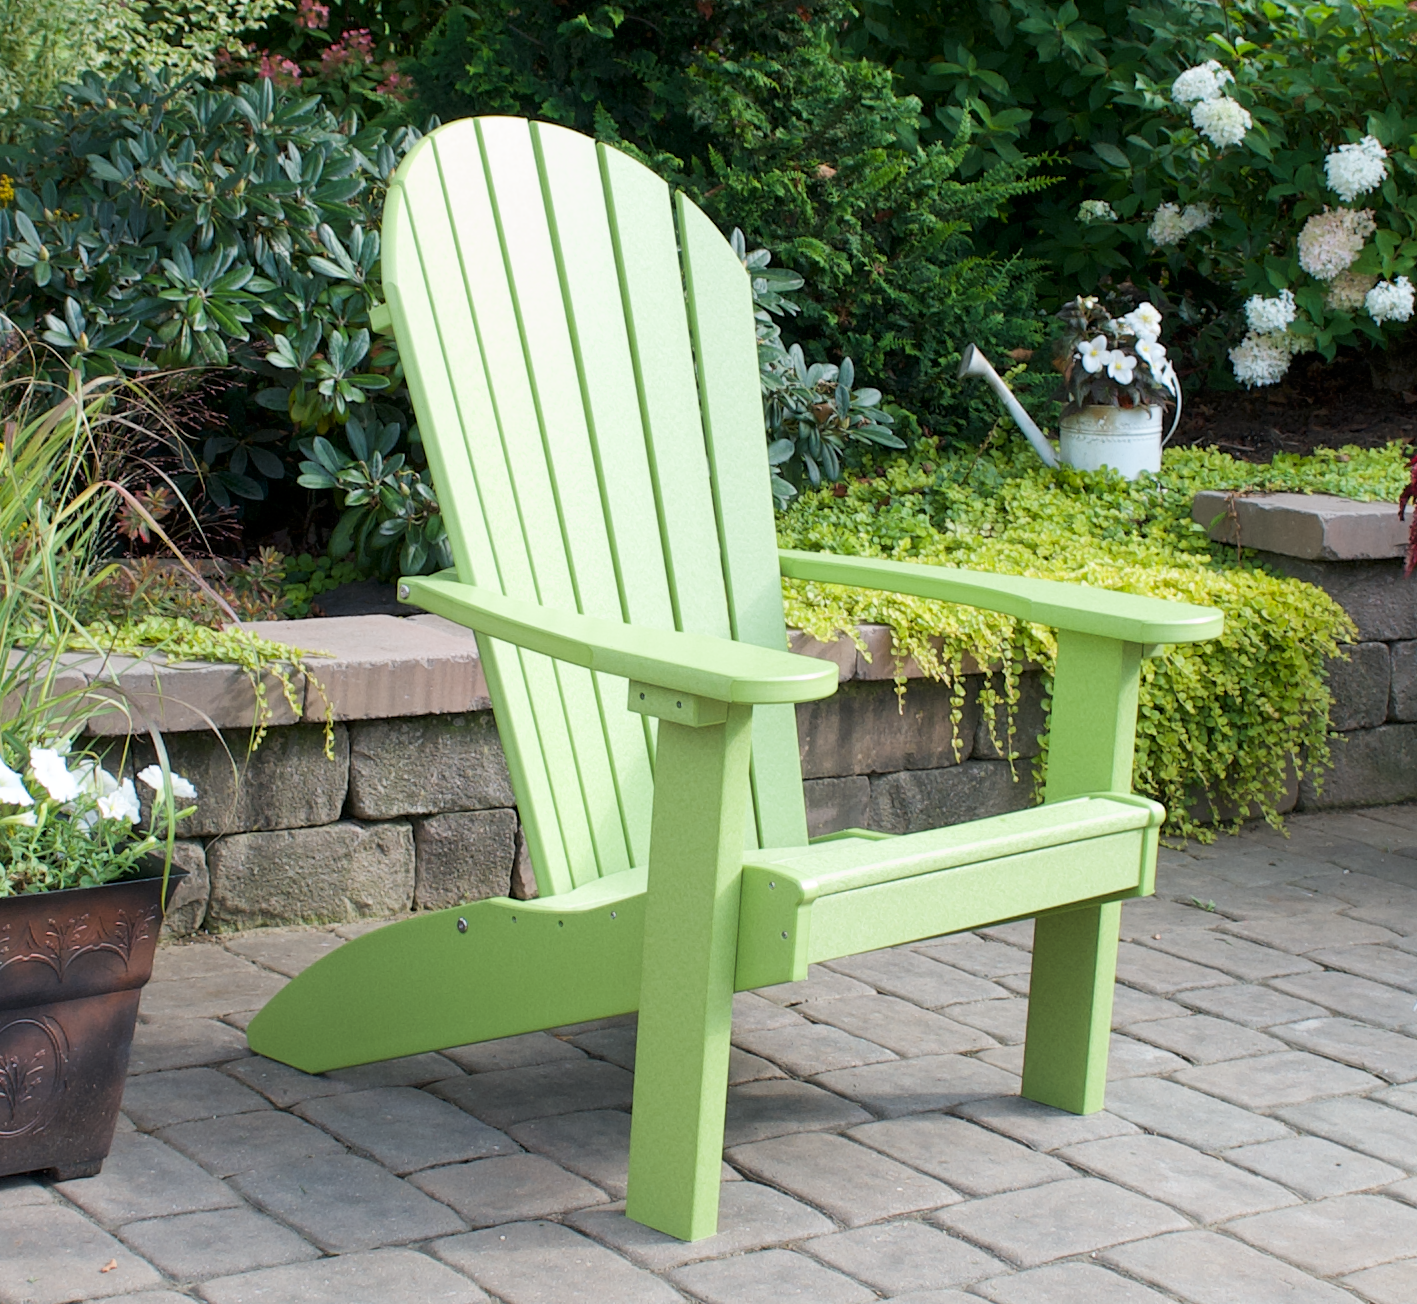 Patiova Recycled Plastic Amish Crafted Adirondack Chair - LEAD TIME TO SHIP 4 WEEKS